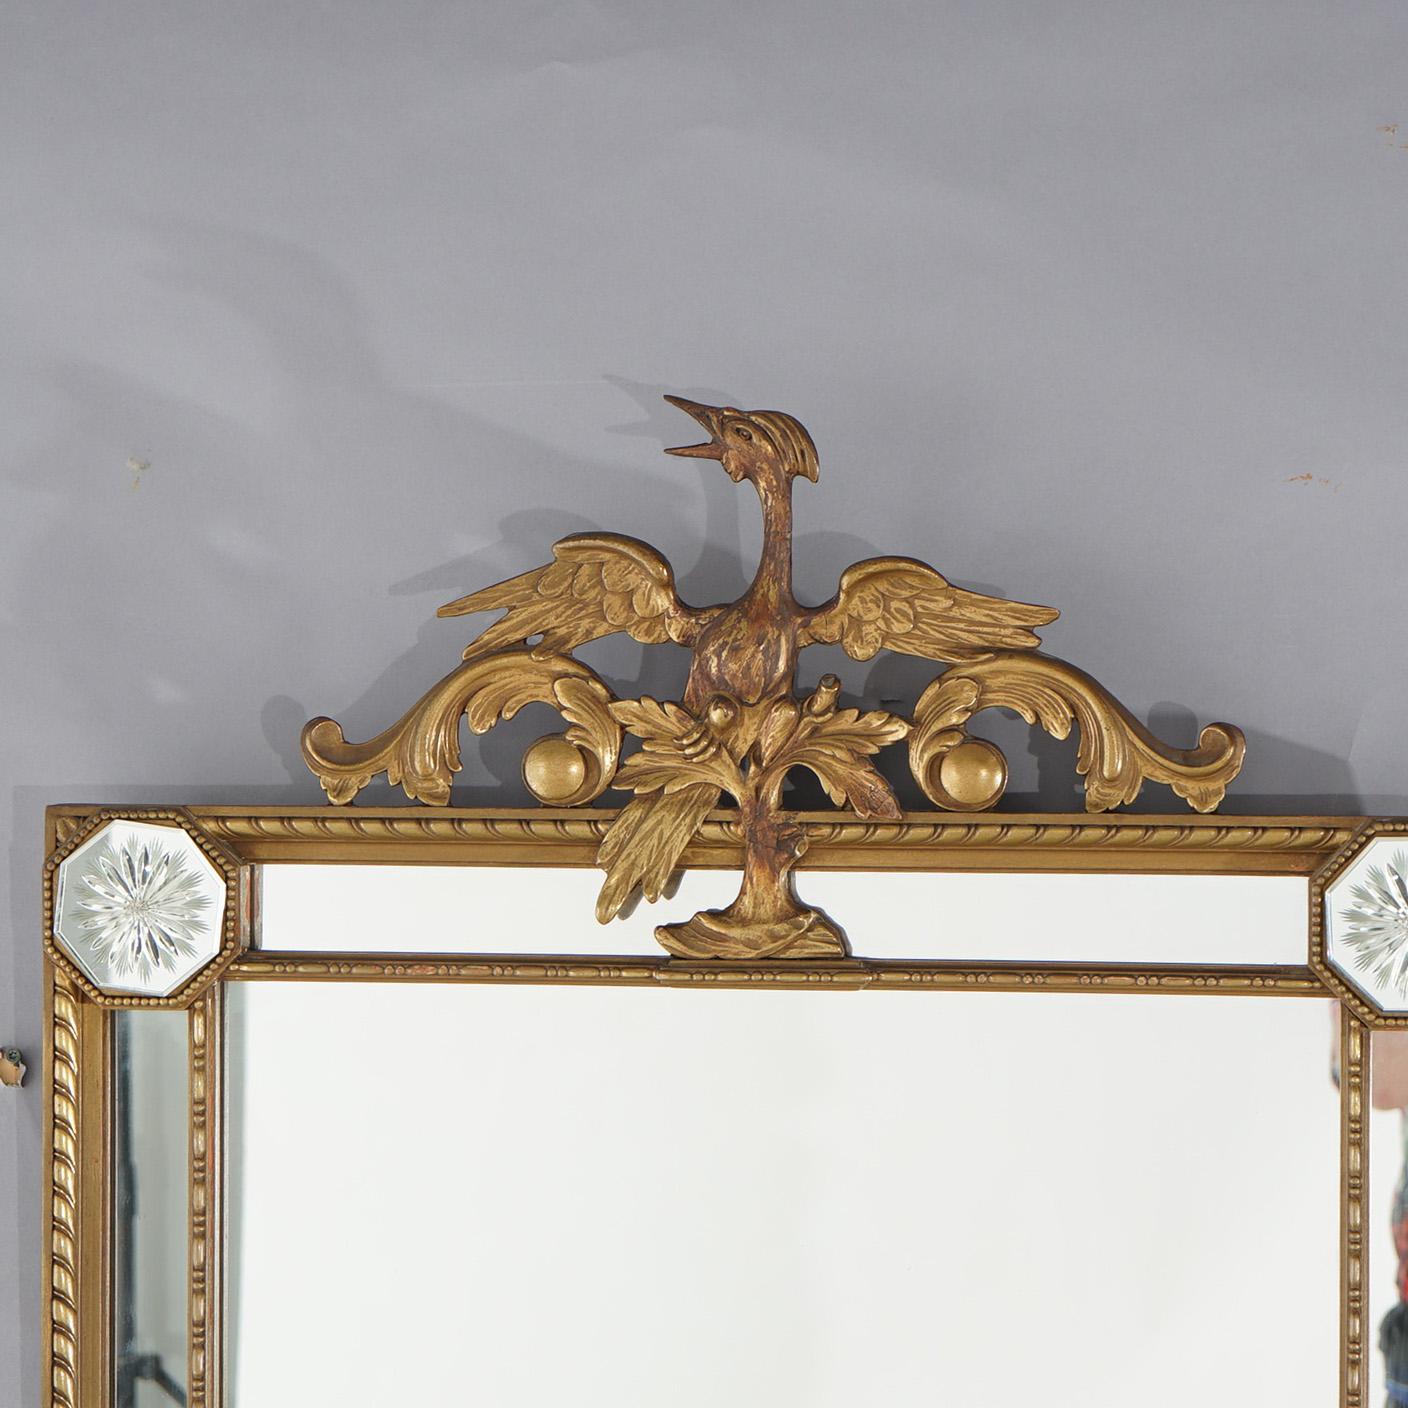 An antique English Chinese Chippendale parclose wall mirror in Regency style offers giltwood frame with figural phoenix crest, c1920

Measures- 46''H x 29''W x 2.5''D